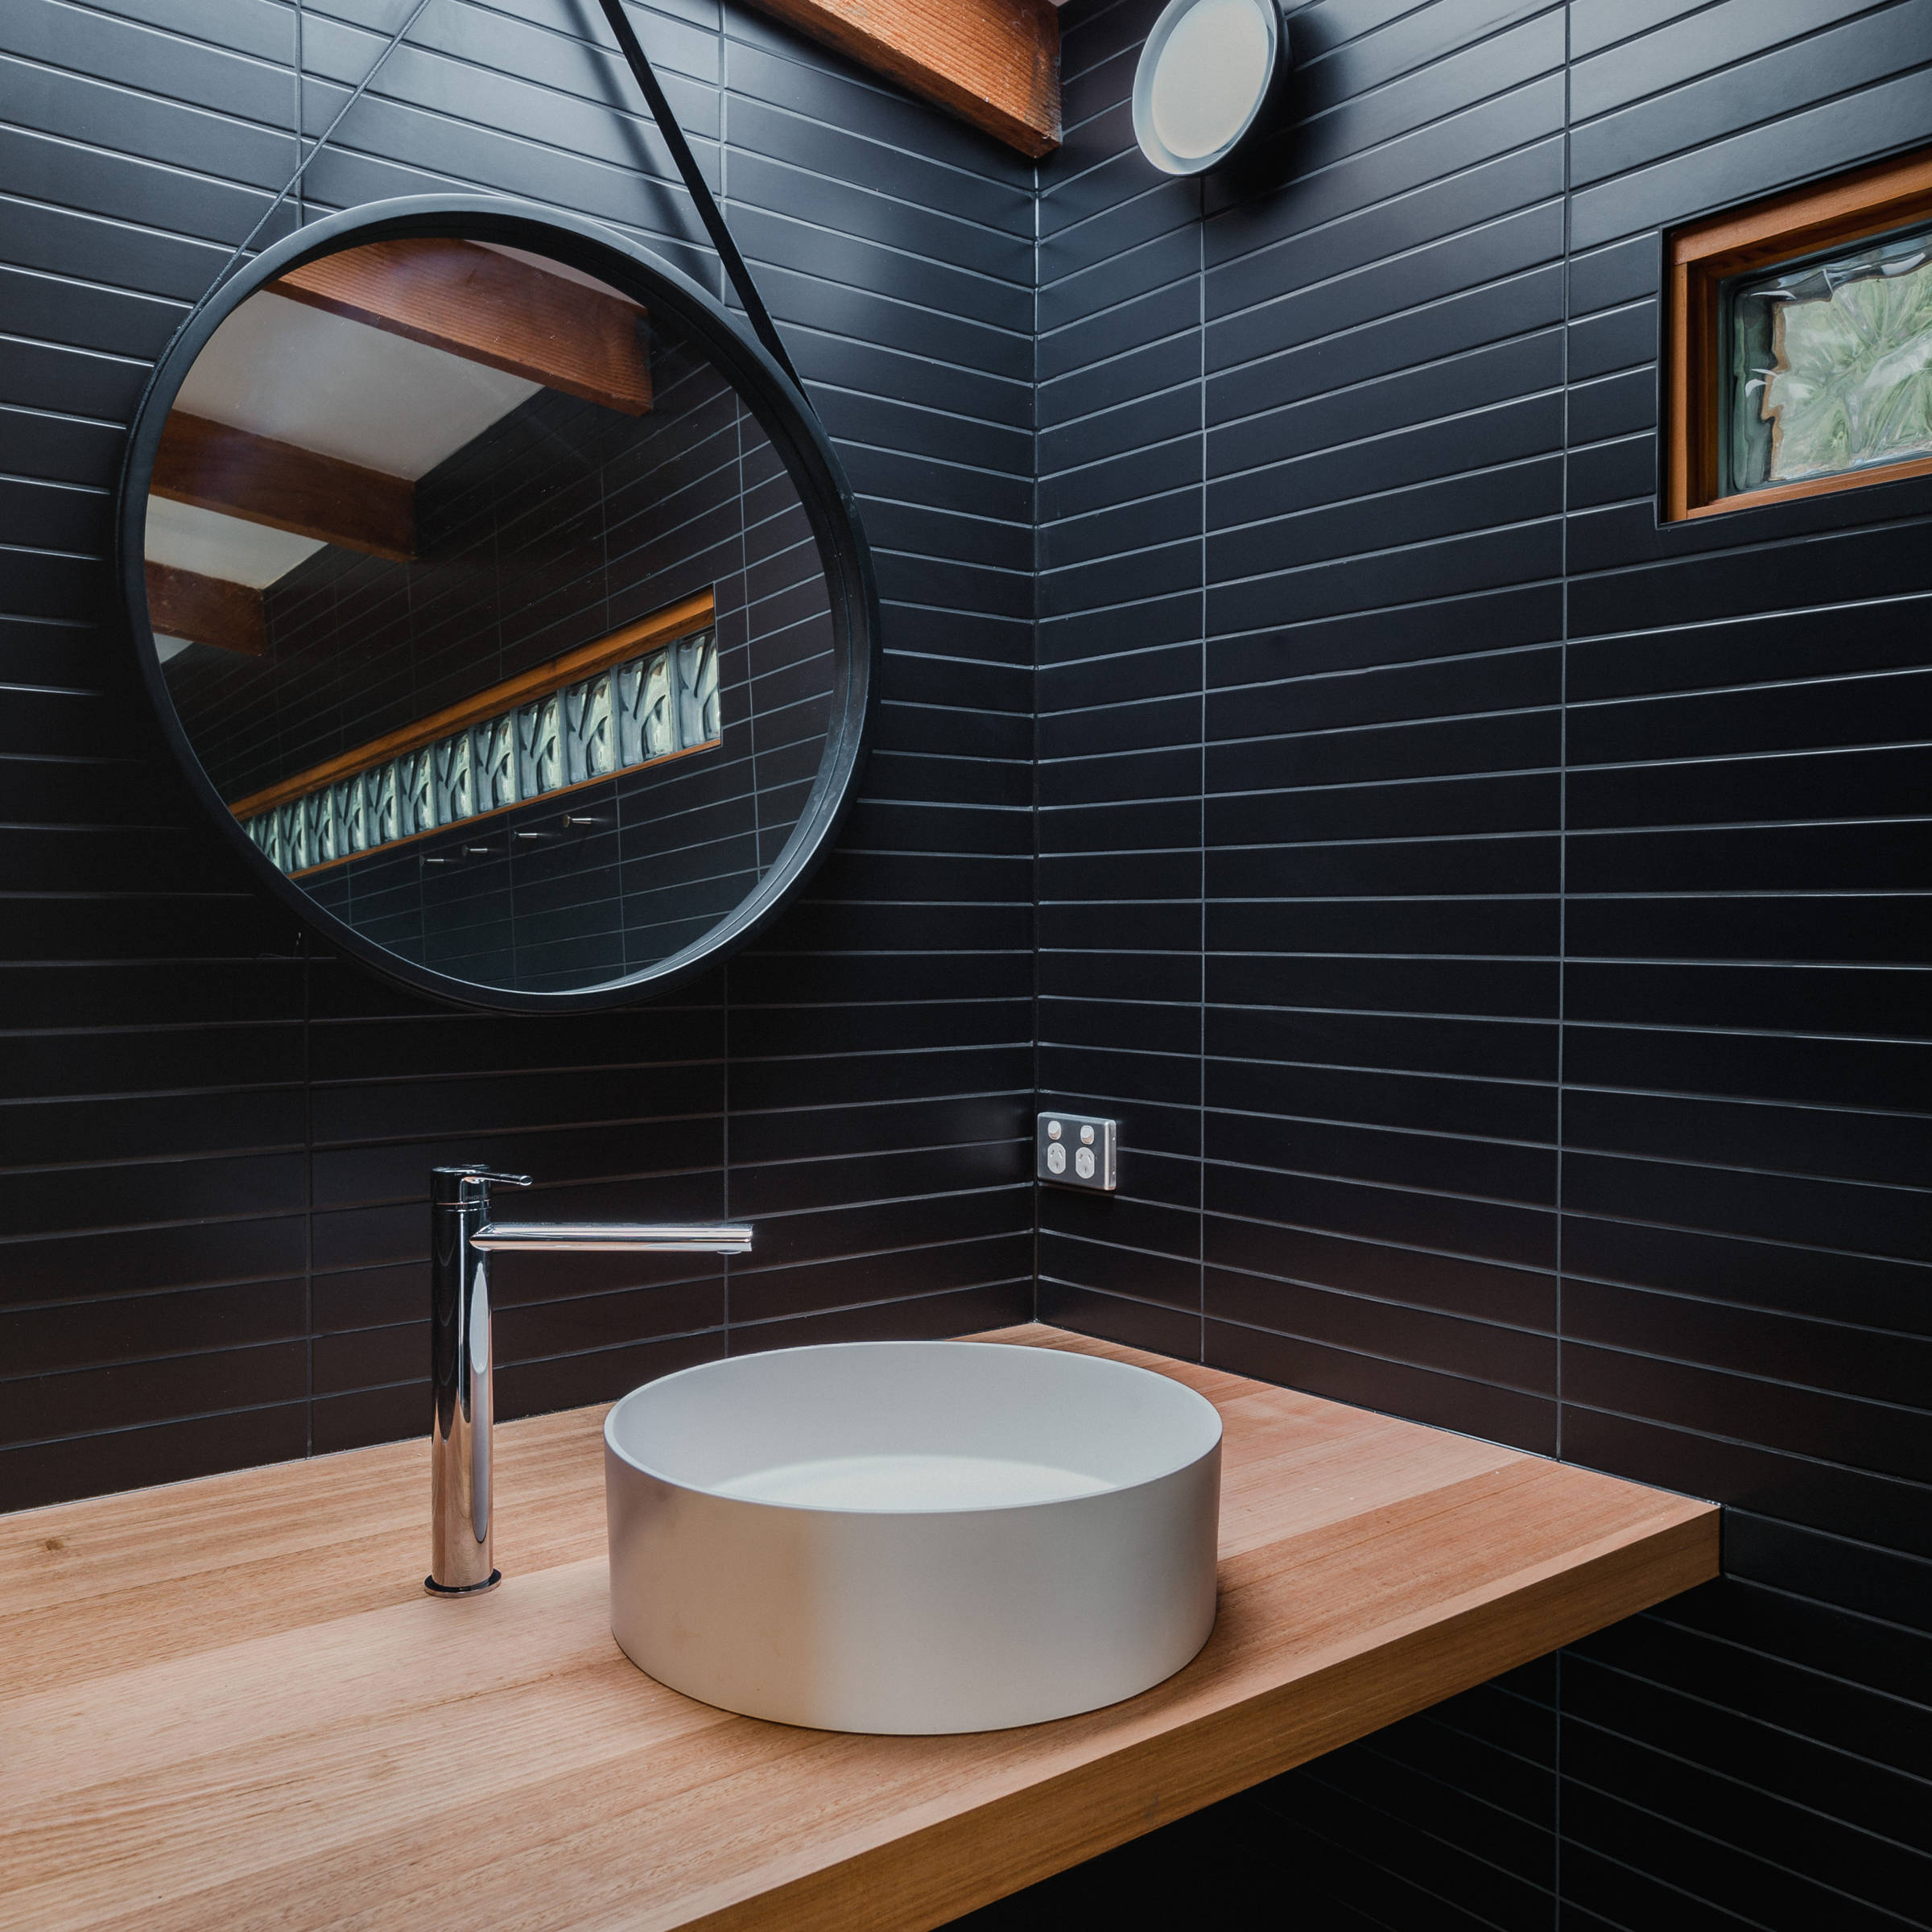 Custom Japanese inspired bathroom renovation featuring black mosaic tiles, hanging mirror, custom timber benchtop in Tasmanian oak. The architectural bathroom renovation was designed to give a contemporary feel and also features a round white basin with increased natural light from a new skylight. Credit: Jordan Davis.